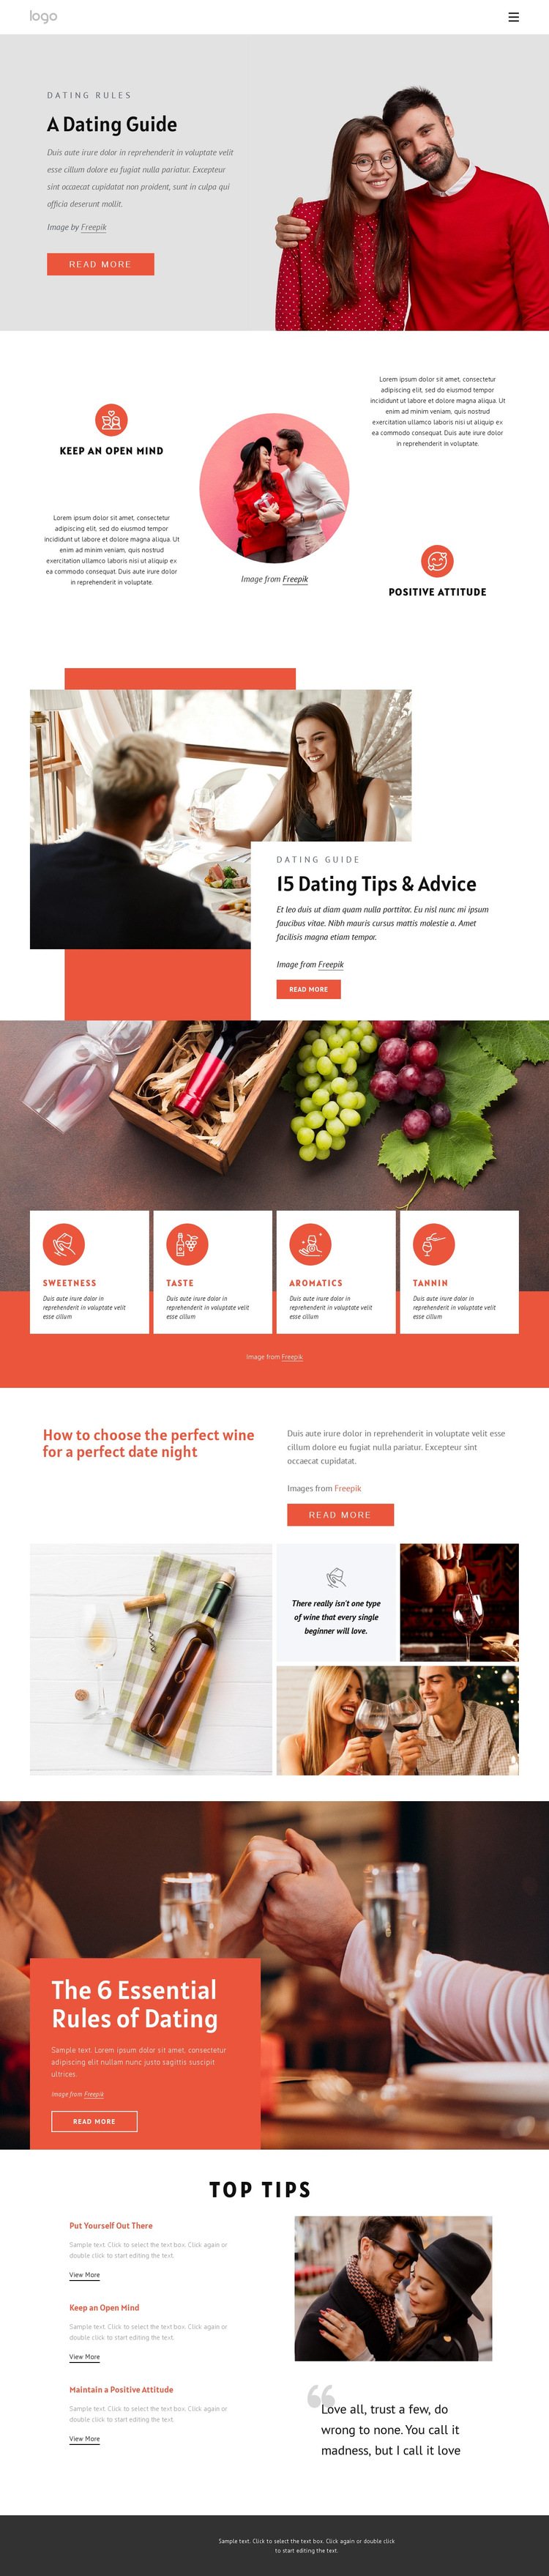 Dating guide HTML5 Template